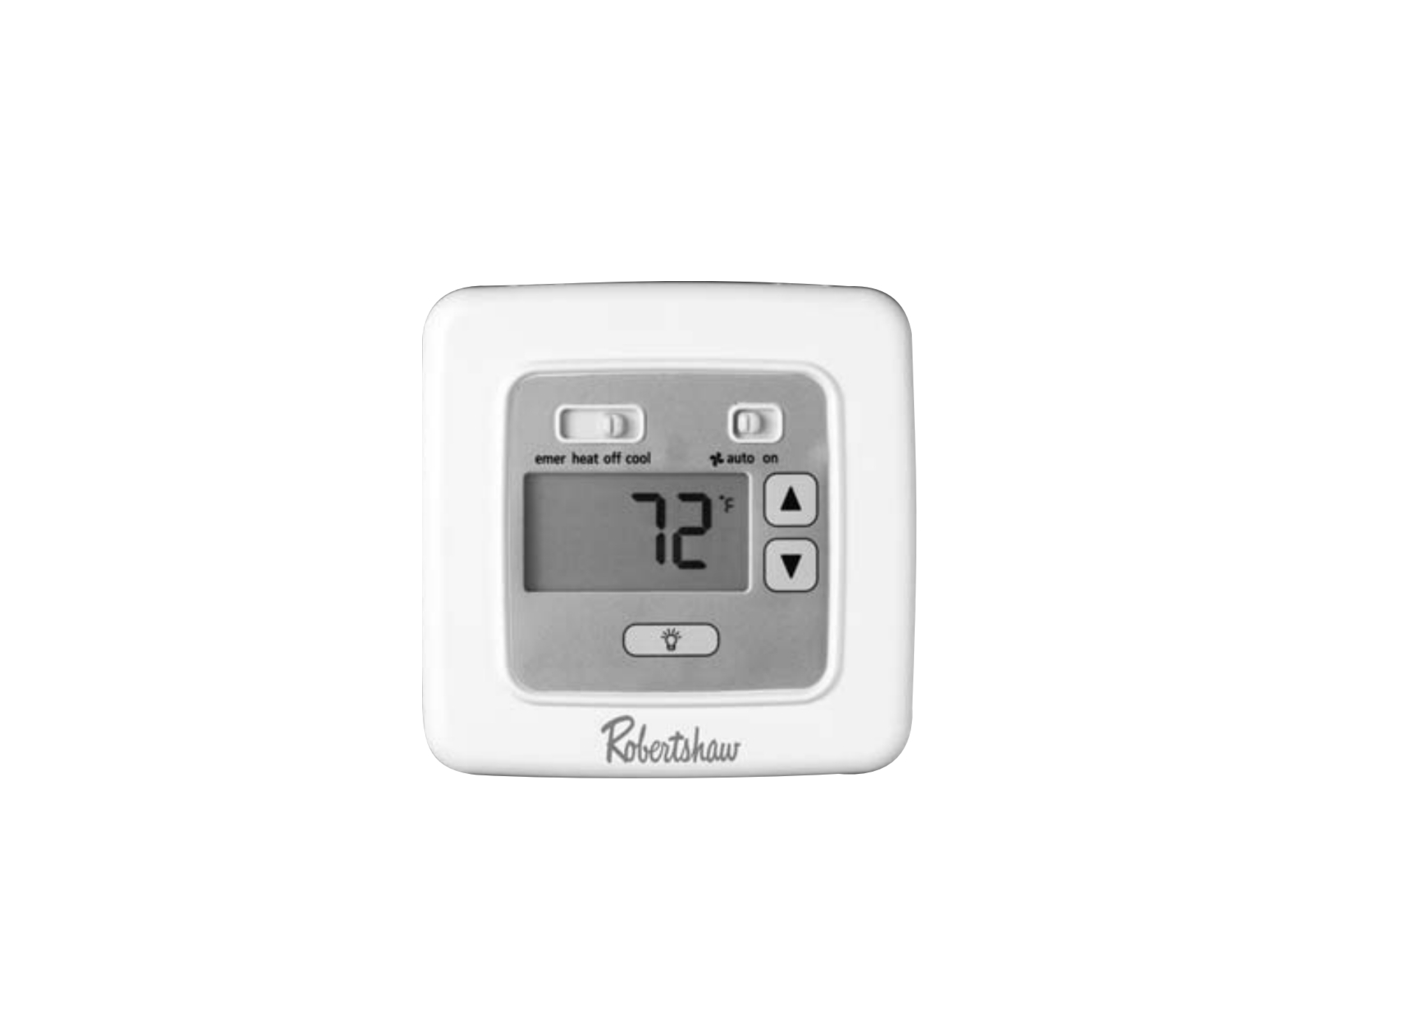 Robertshaw 8600 PROGRAMMABLE THERMOSTAT User Manual